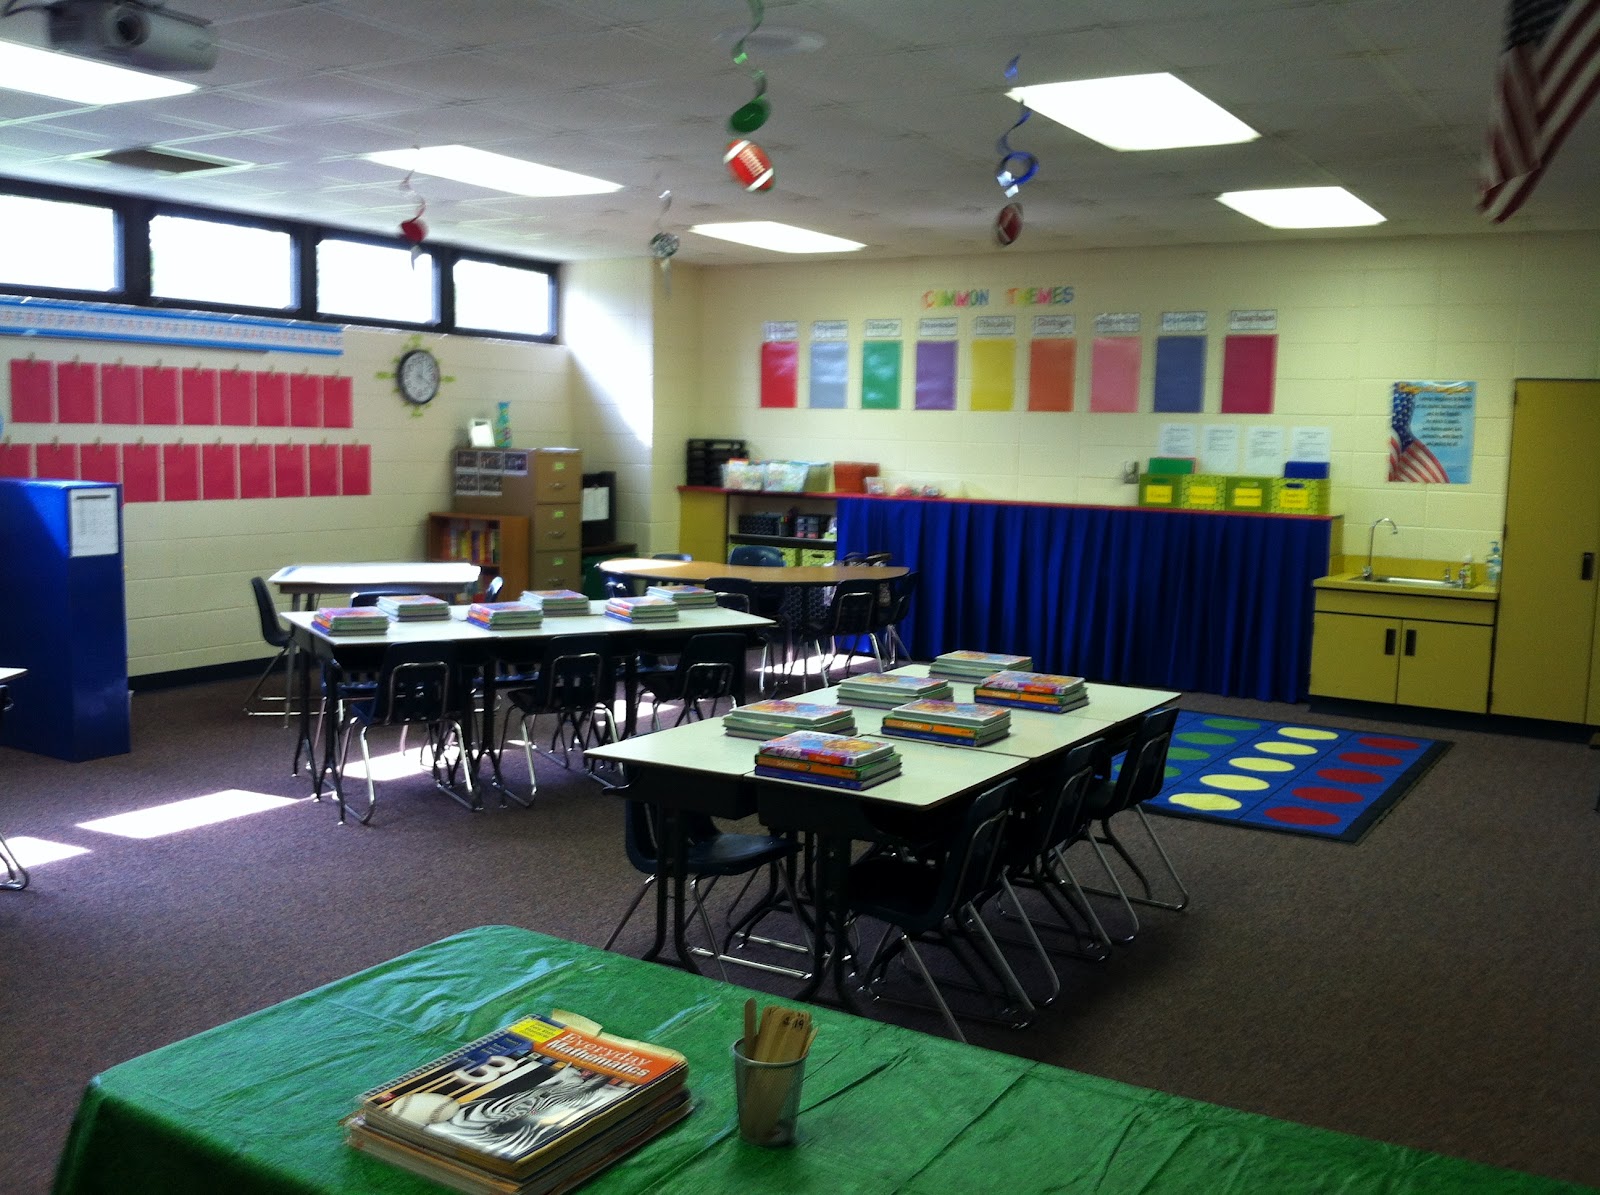 Classroom : Doing Activity of Decorating with Classroom Decoration ... / Create a community of readers in your classroom.